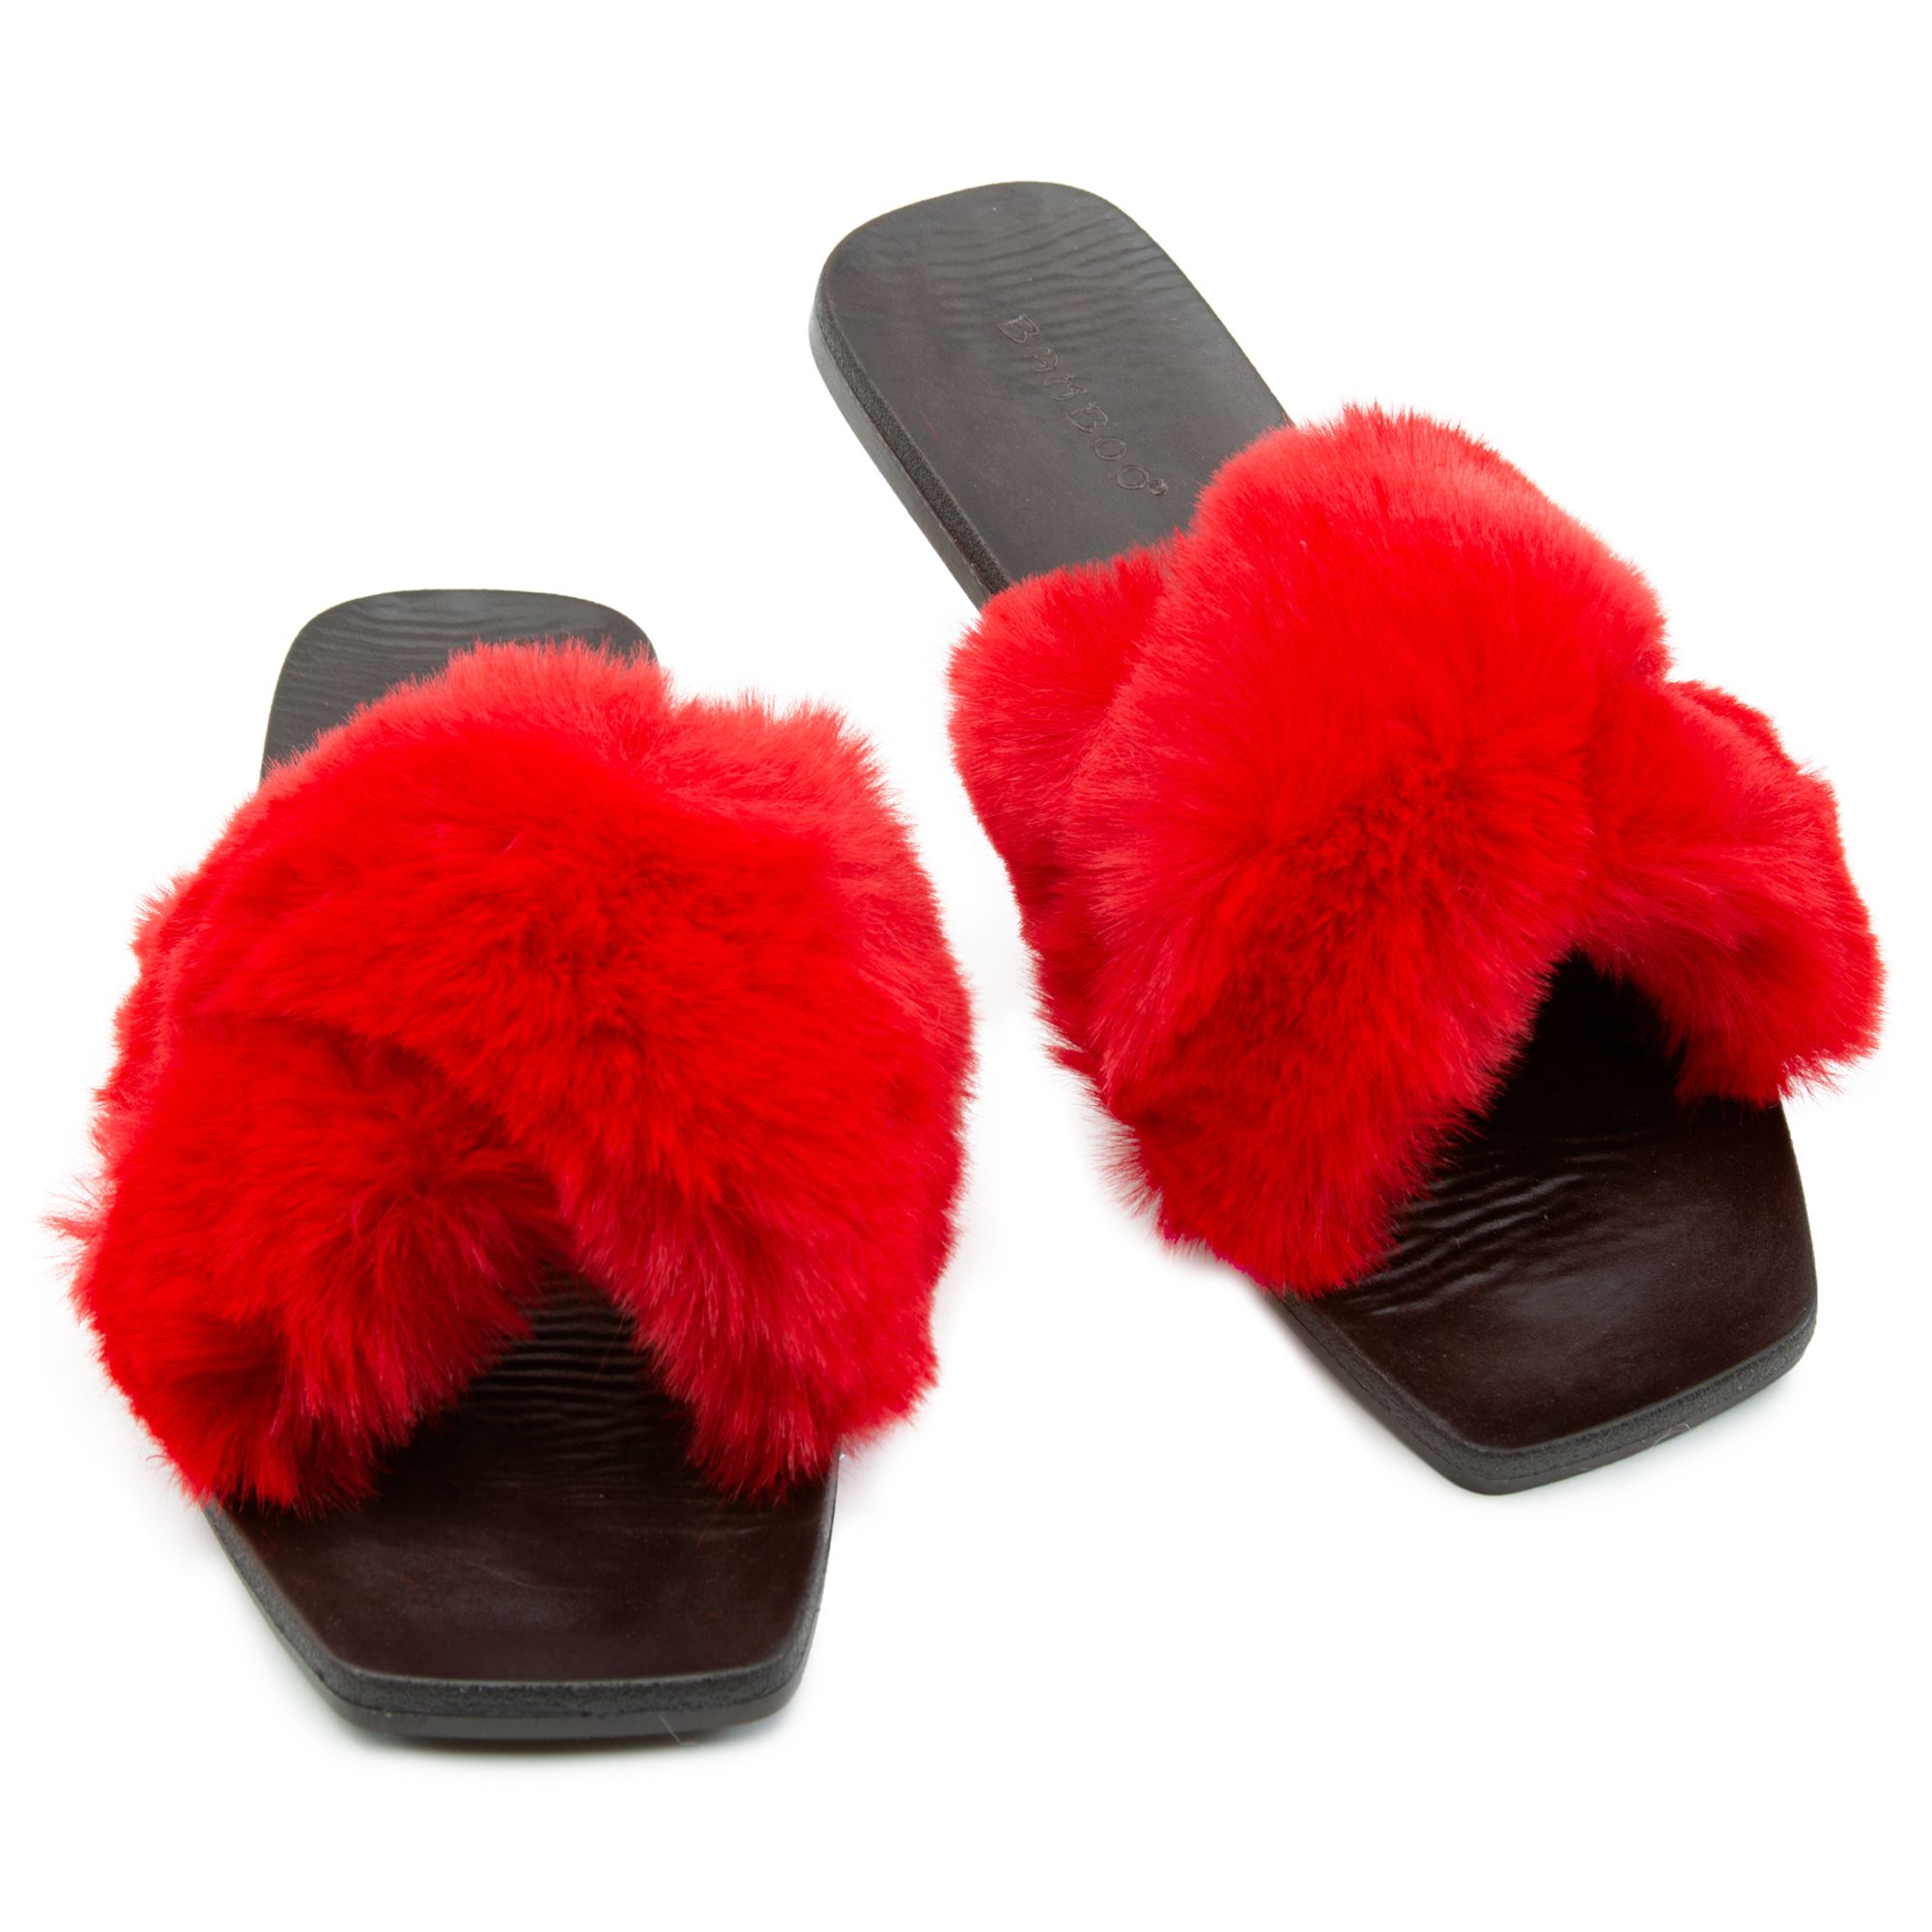 red fluffy sandals